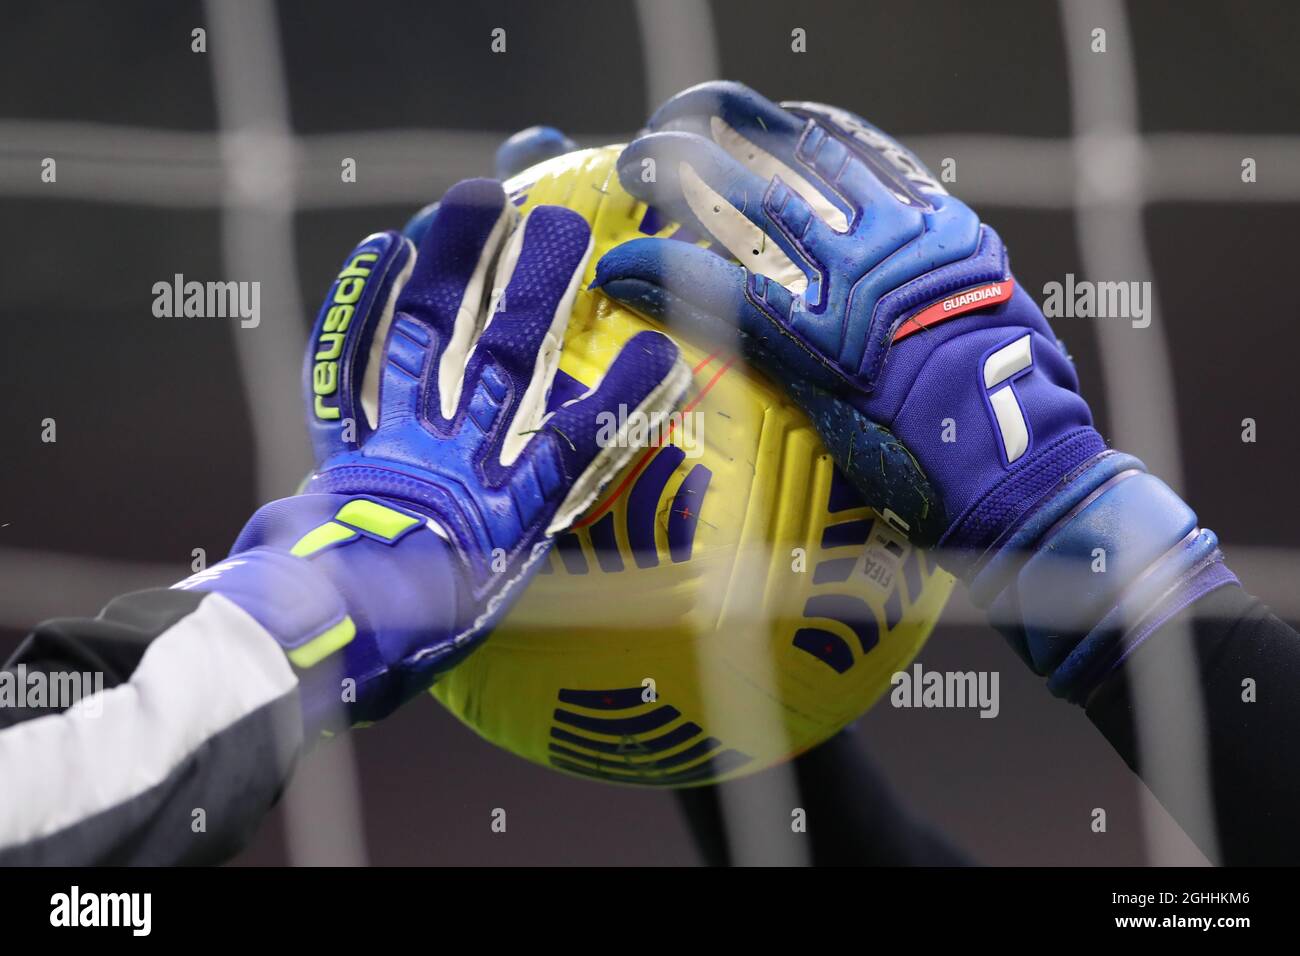 Udinese Calcio goalkeepers weariness Reusch gloves go through their warm up drill prior to the Serie A match at Giuseppe Meazza, Milan. Picture date: 3rd March 2021. Picture credit should read: Jonathan Moscrop/Sportimage via PA Images Stock Photo